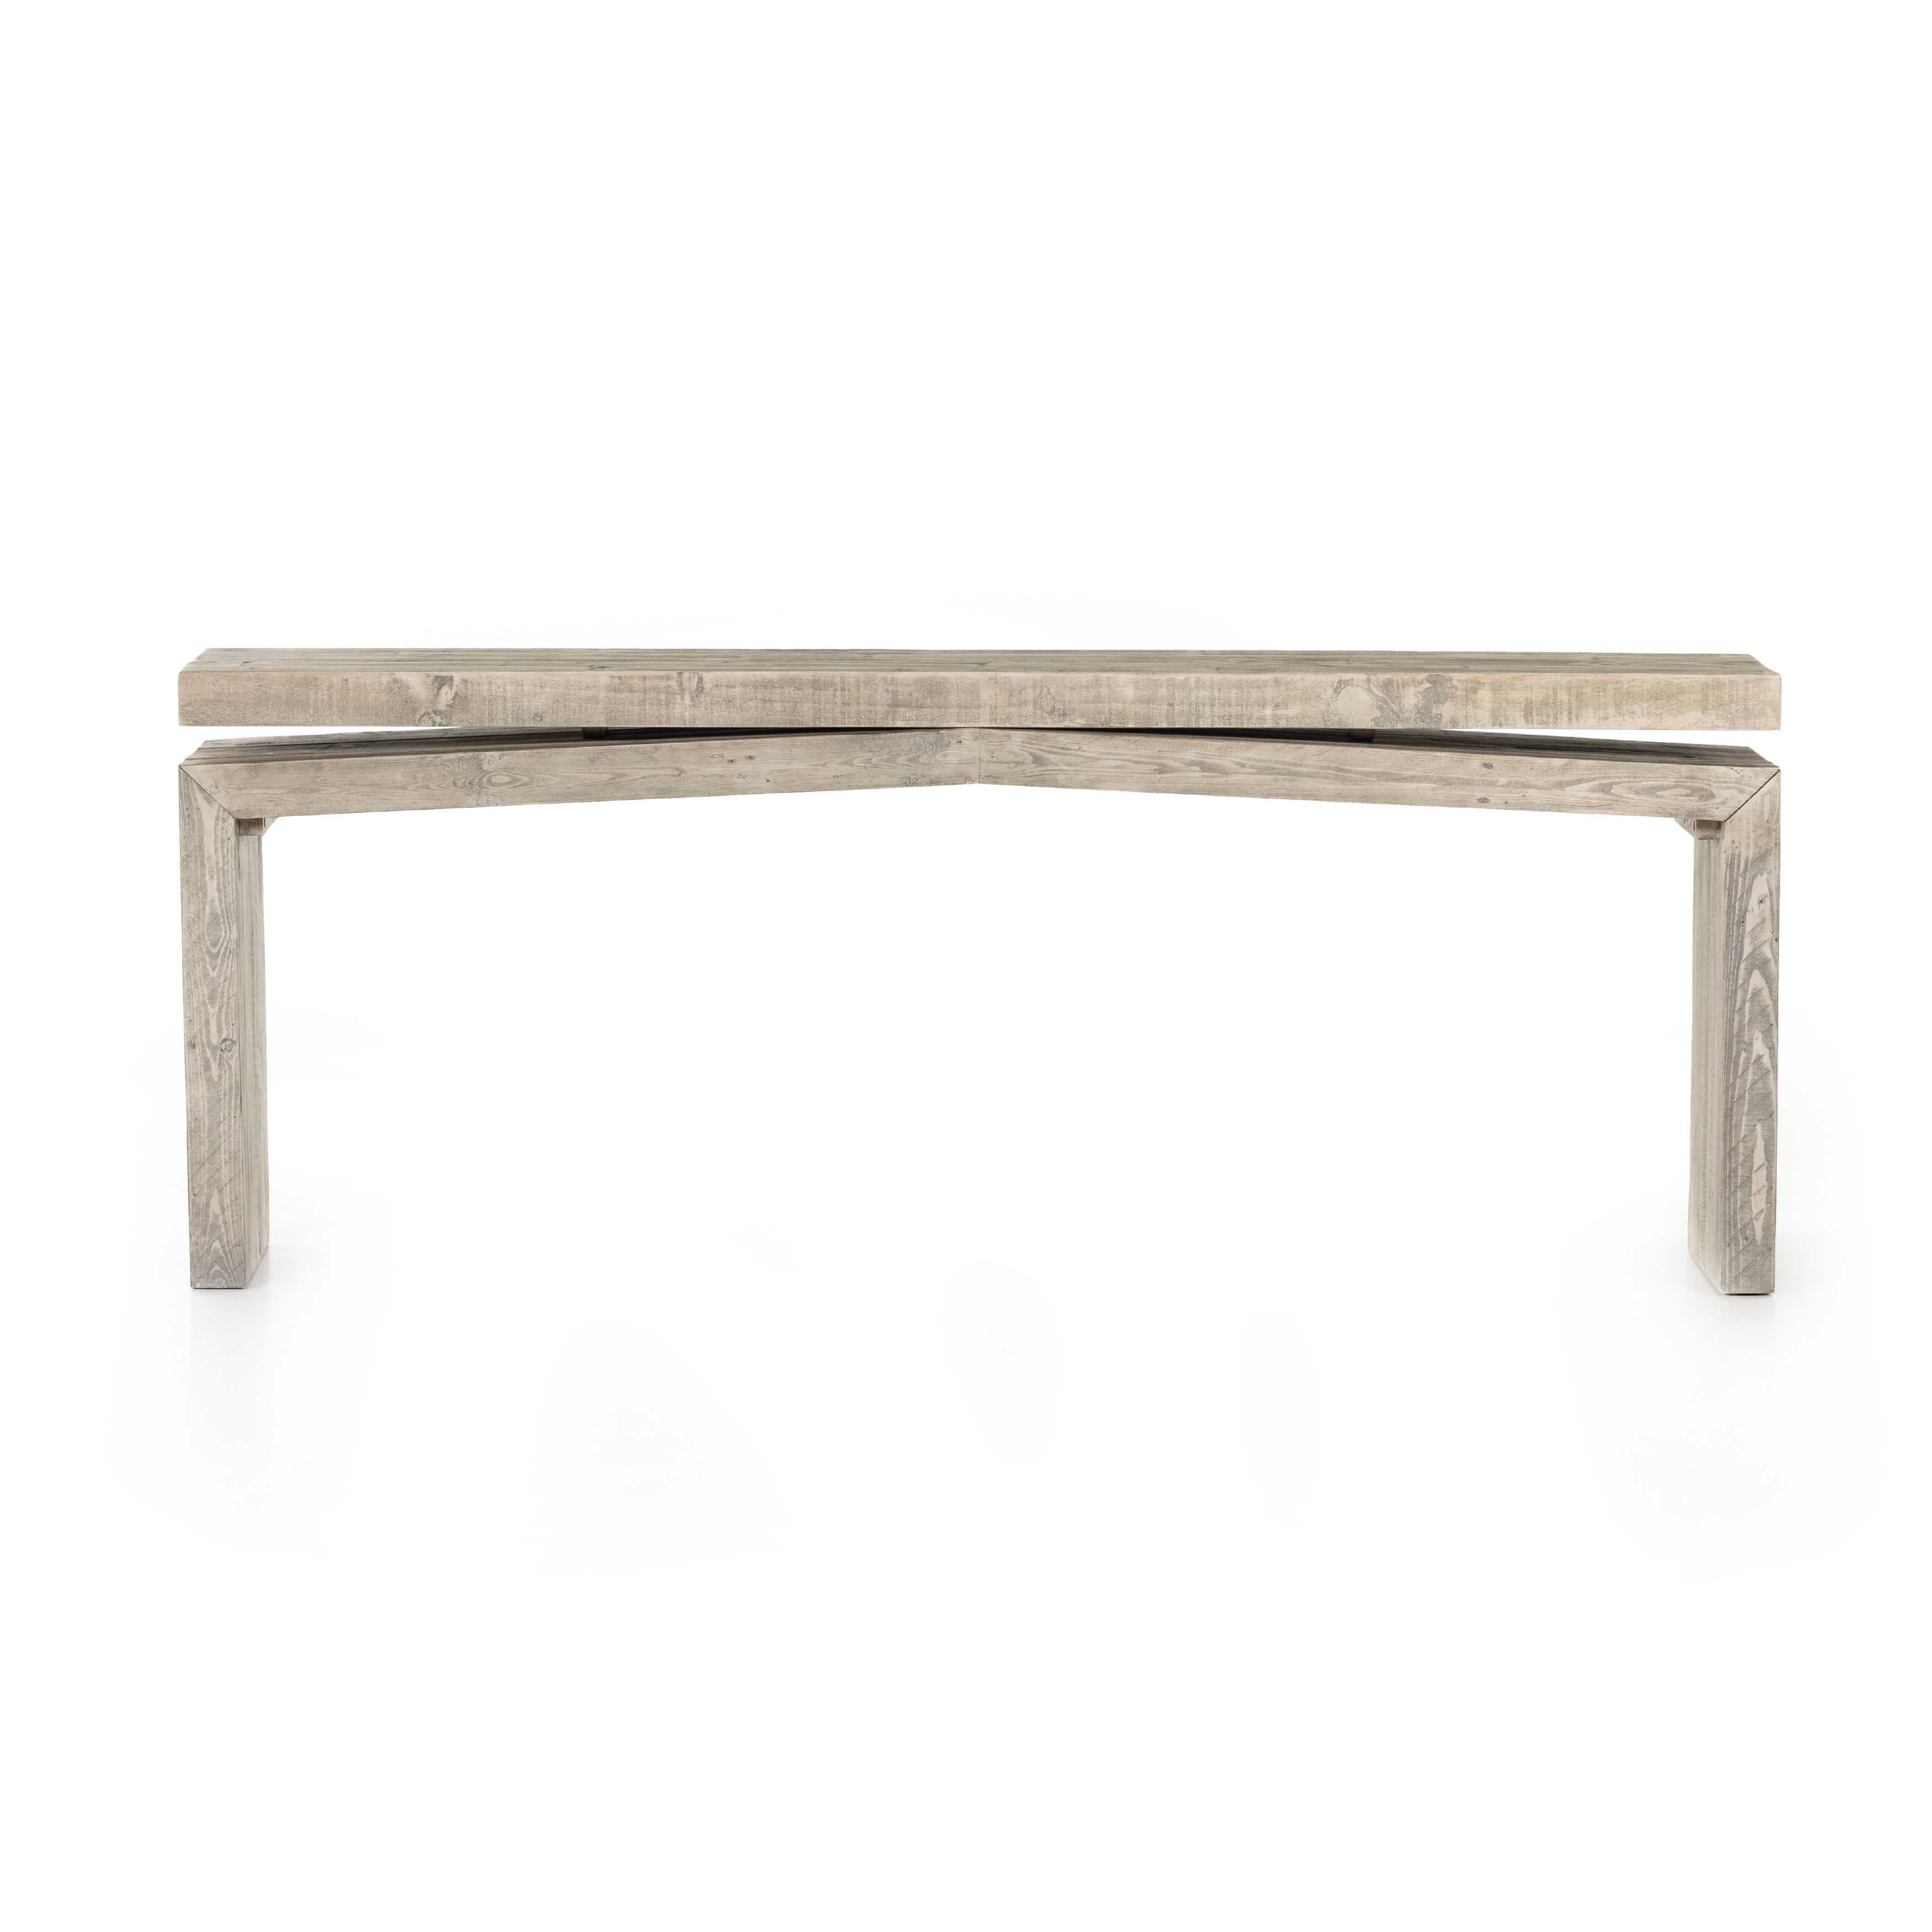 Matthes Console Table-Weathered Wheat - Image 3